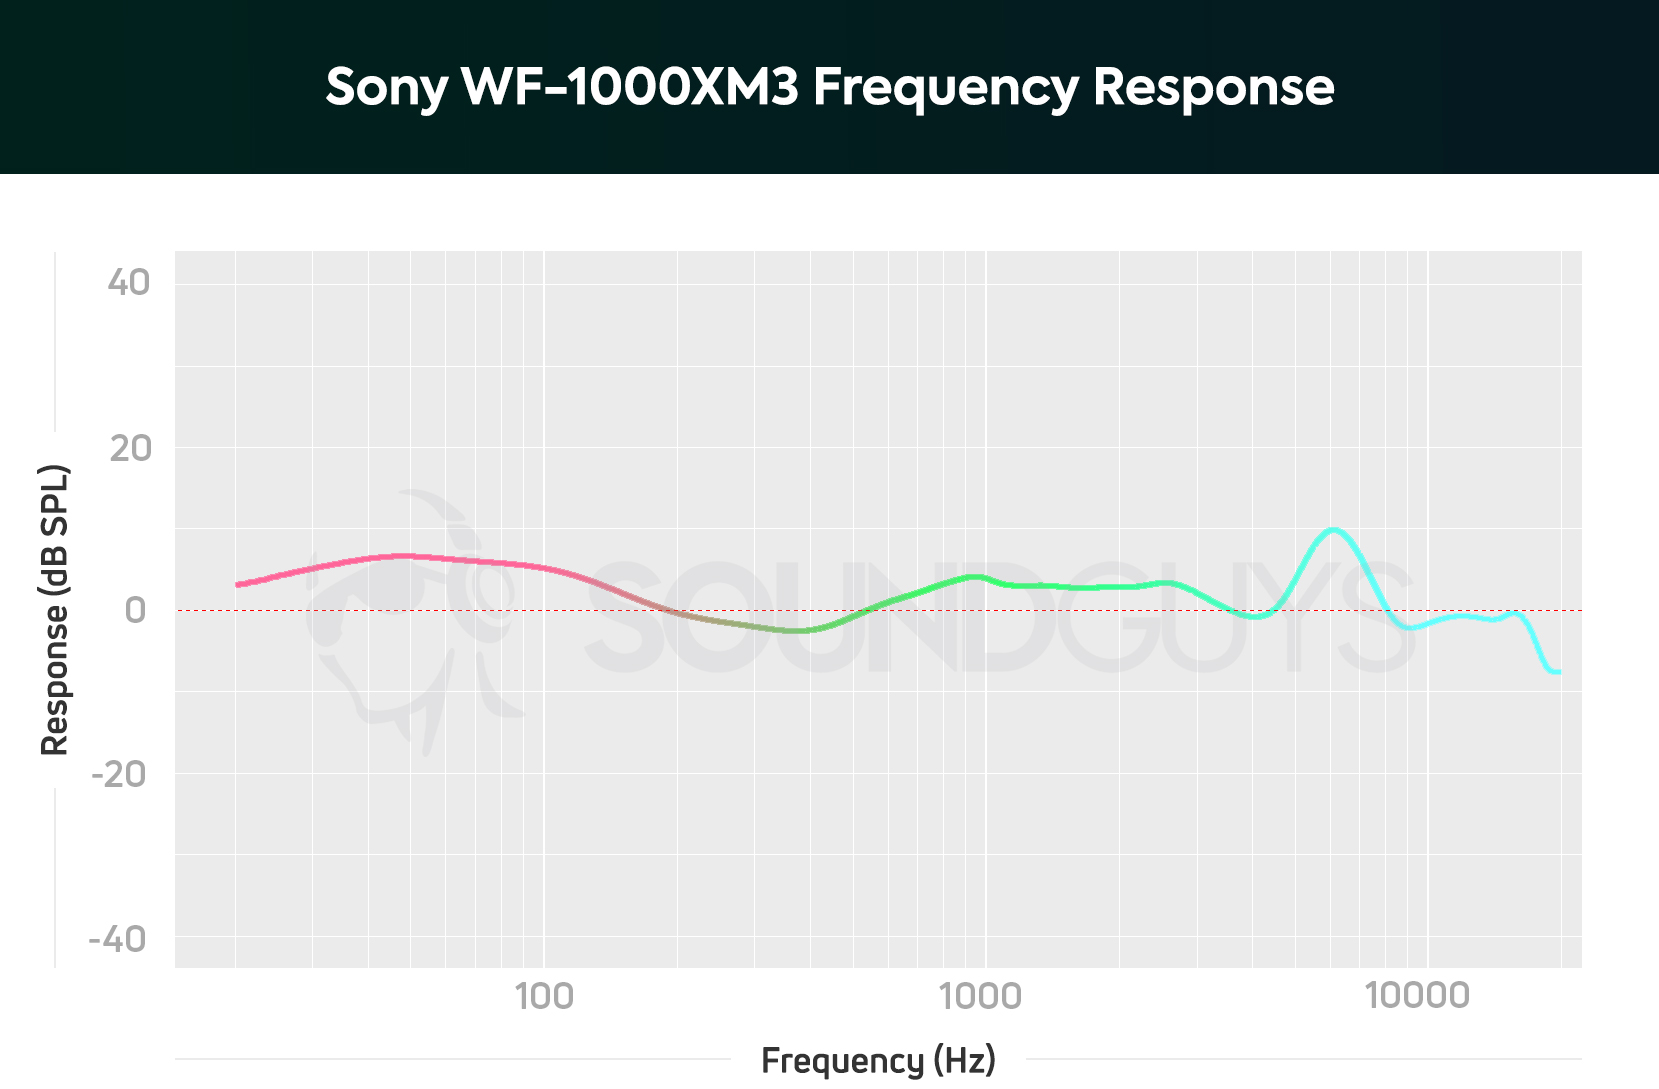 Sony WF-1000XM3 frequency response chart.